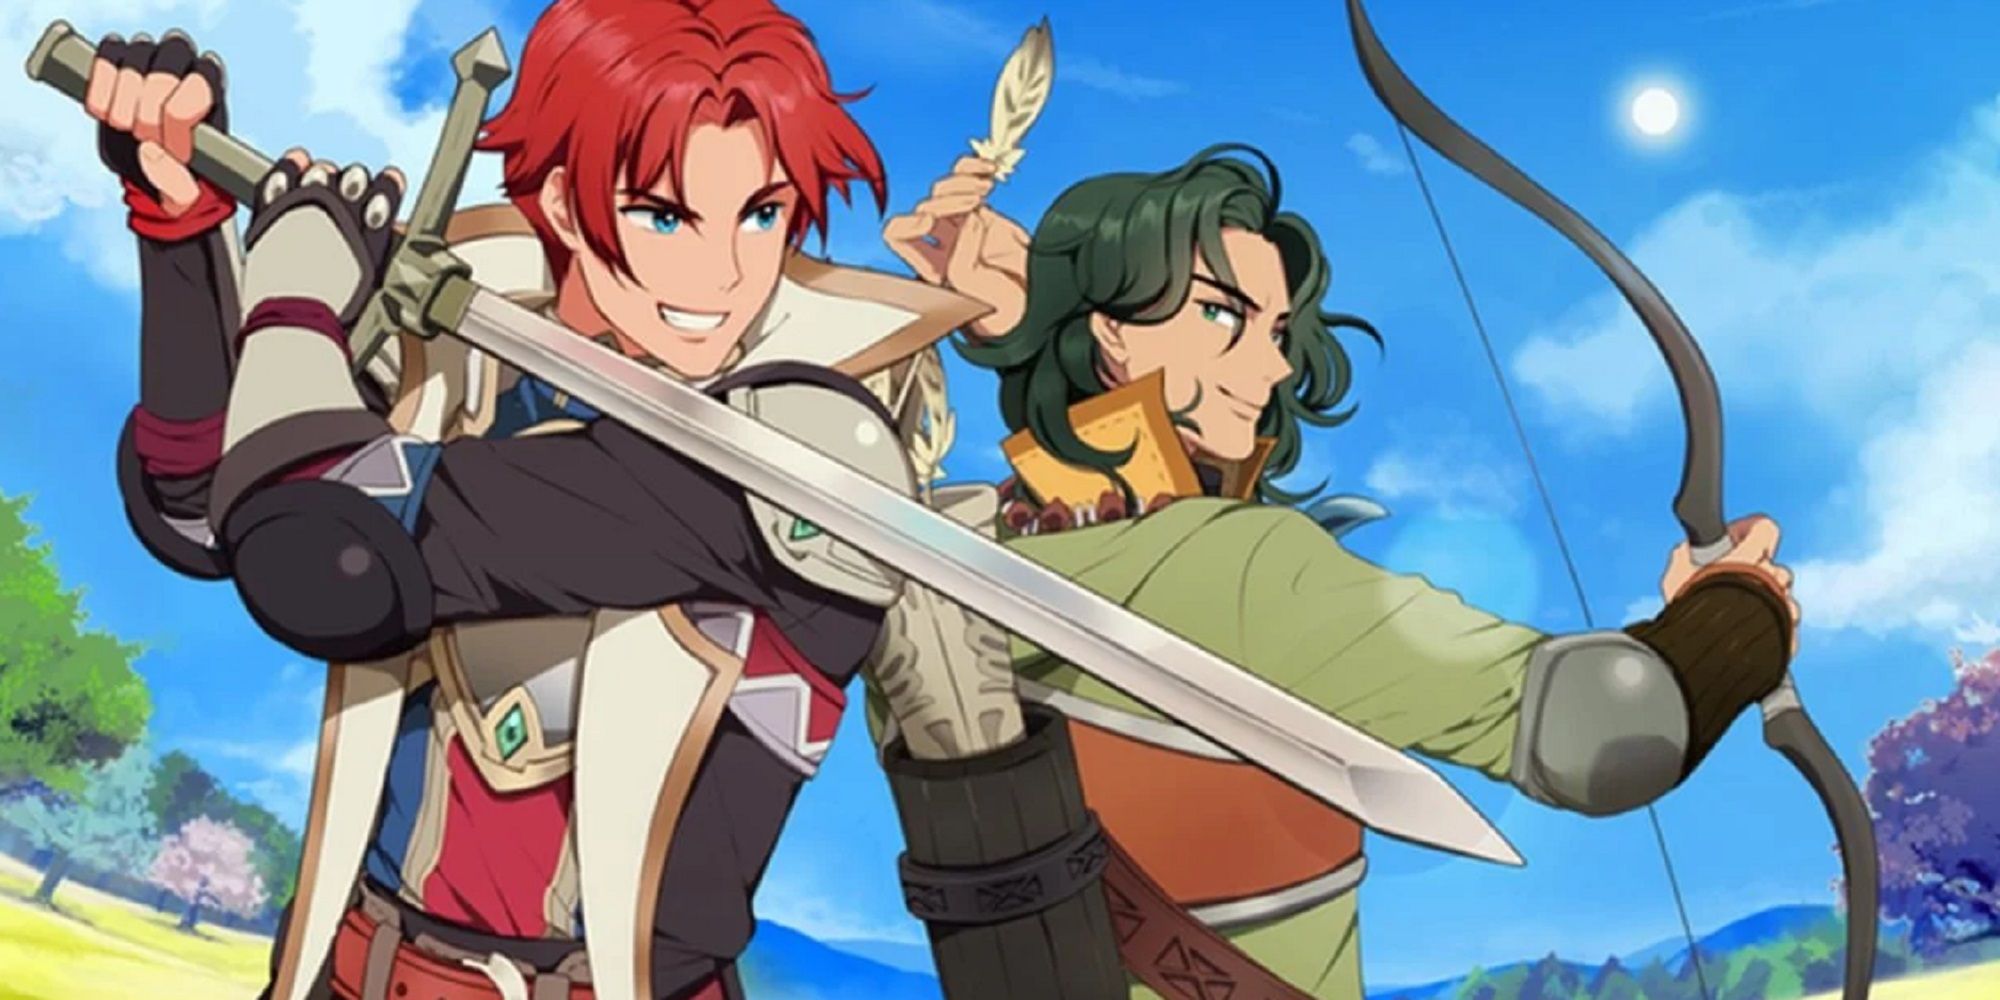 A swordfighter and an archer stand together in Dark Deity art